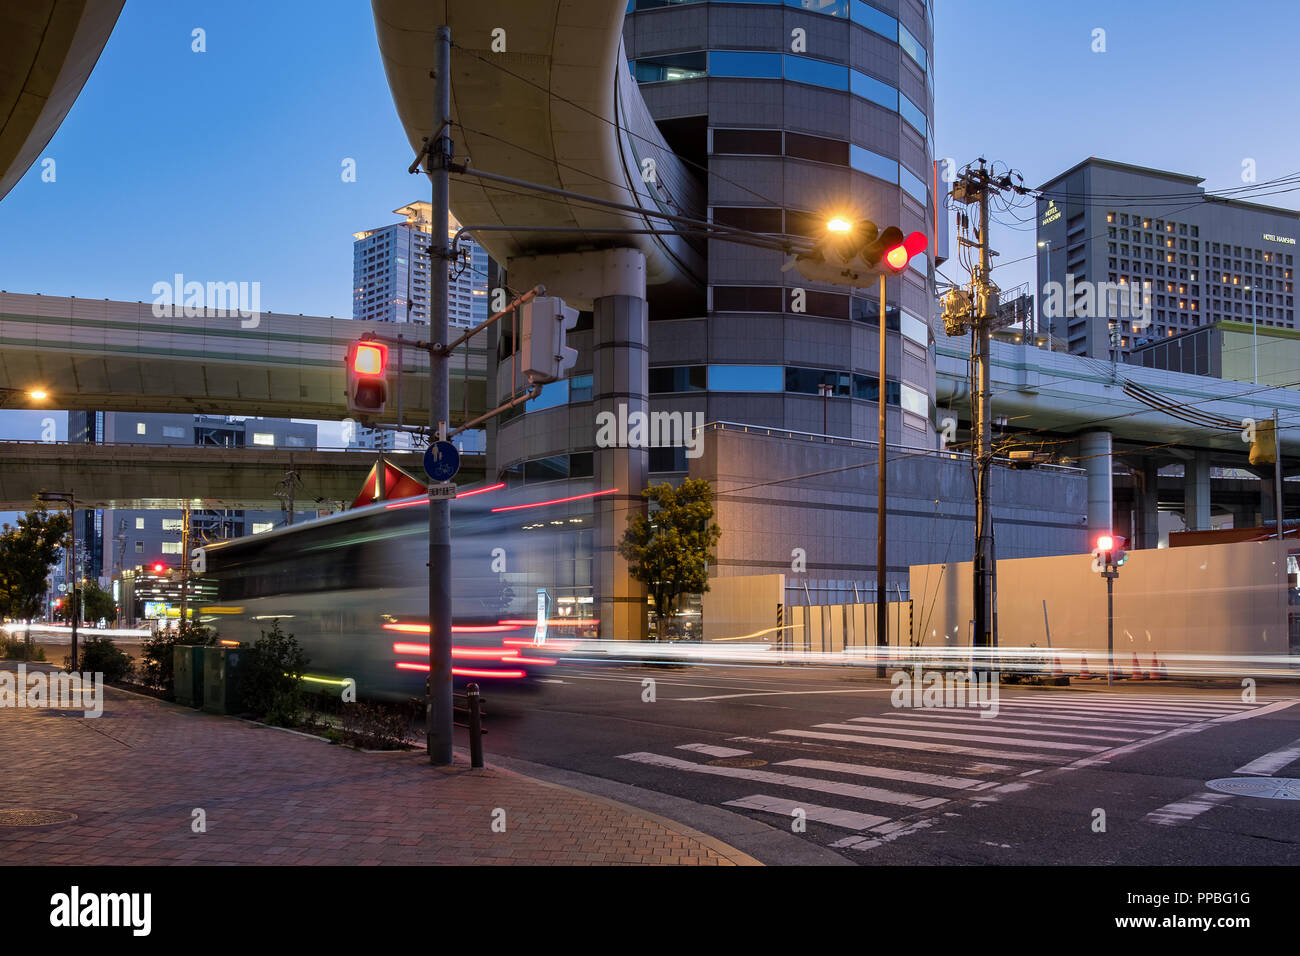 TOKYO, JAPAN - 29 JAN 2018: Gate tower building in Osaka It is notable for the highway offramp at Umeda Exit that passes through. Long exposure shot f Stock Photo